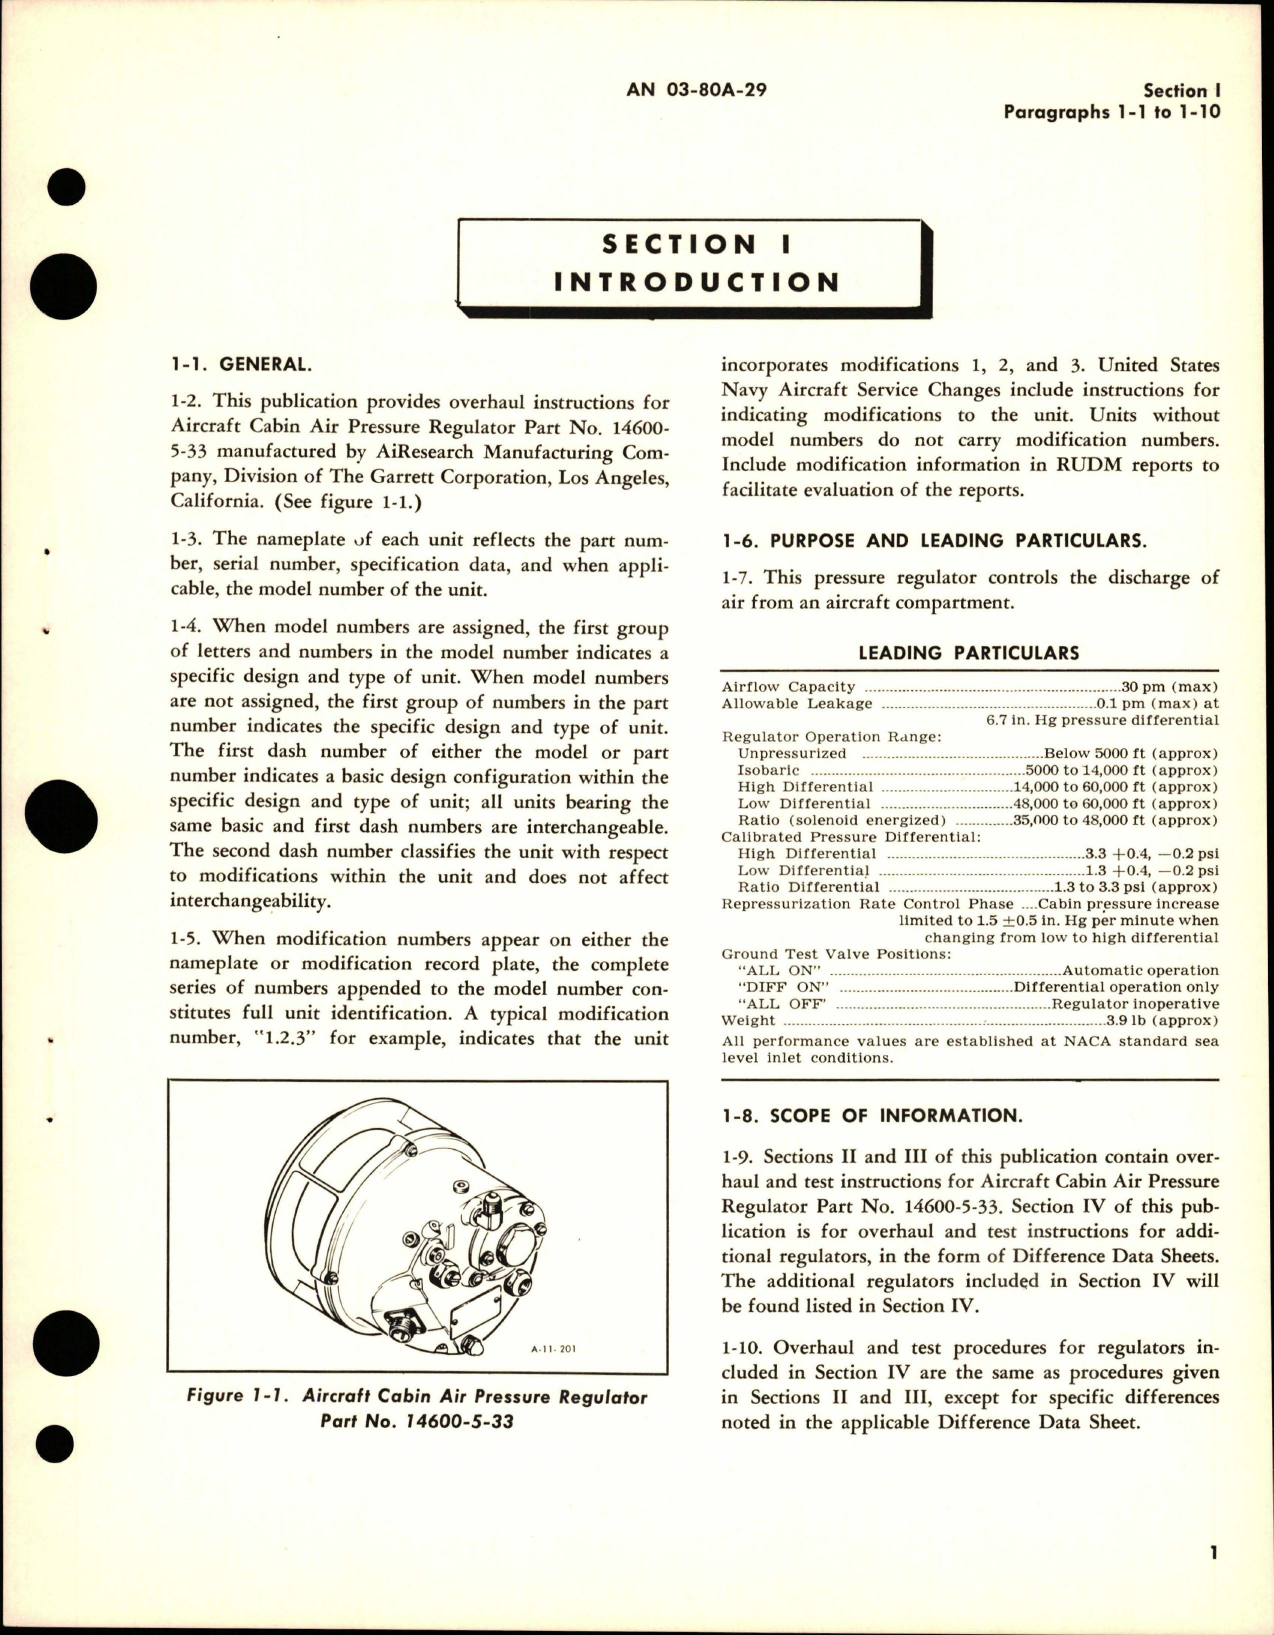 Sample page 5 from AirCorps Library document: Overhaul Instructions for Aircraft Cabin Air Pressure Regulators - Parts 14600-5-33 and 14600-5-33-3 - Model CPR1-8